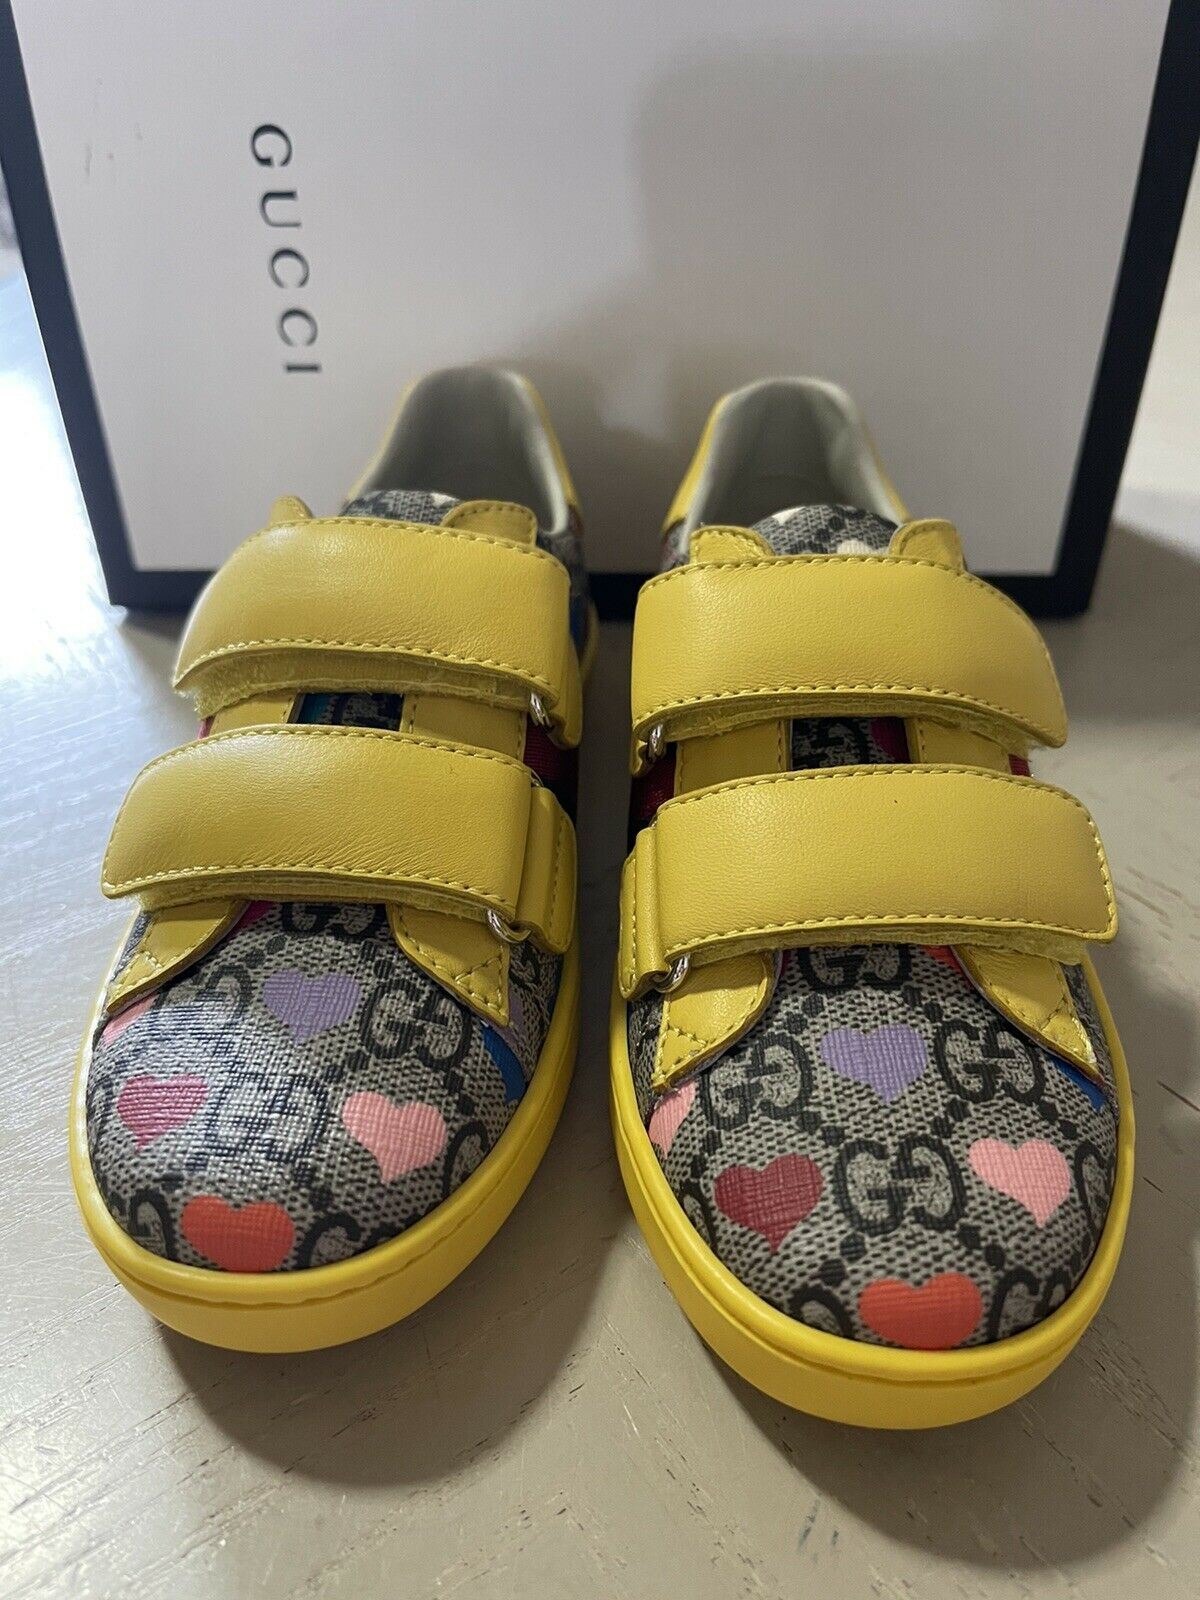 NIB Gucci Kids GG Monogram Leather/Canvas Sneakers Yellow/Cray 28/10 US Age 5